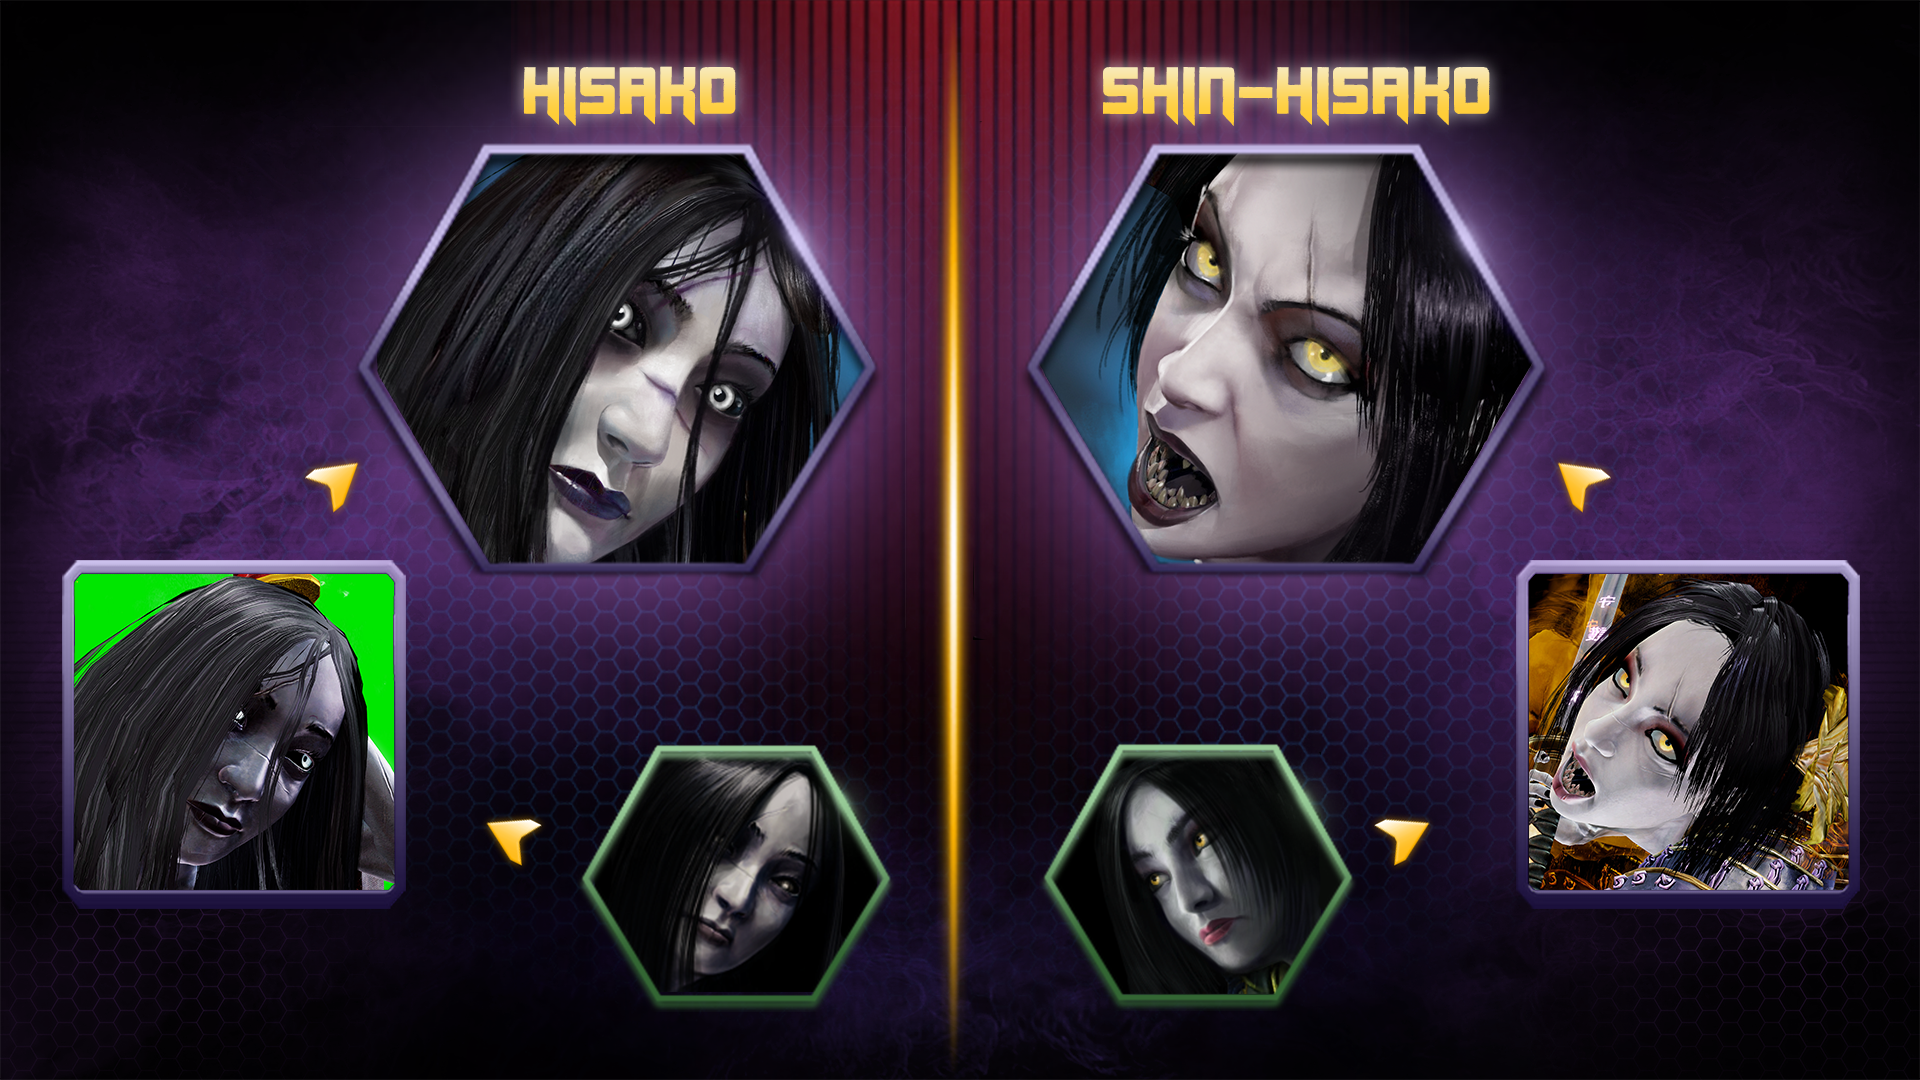 Hisako and Shin-Hisako's final character icon positioned in the top-center of the image, with 2 transition photos comparing the previous icons, with green screen reference images used for the latest art, ending with the latest icon.